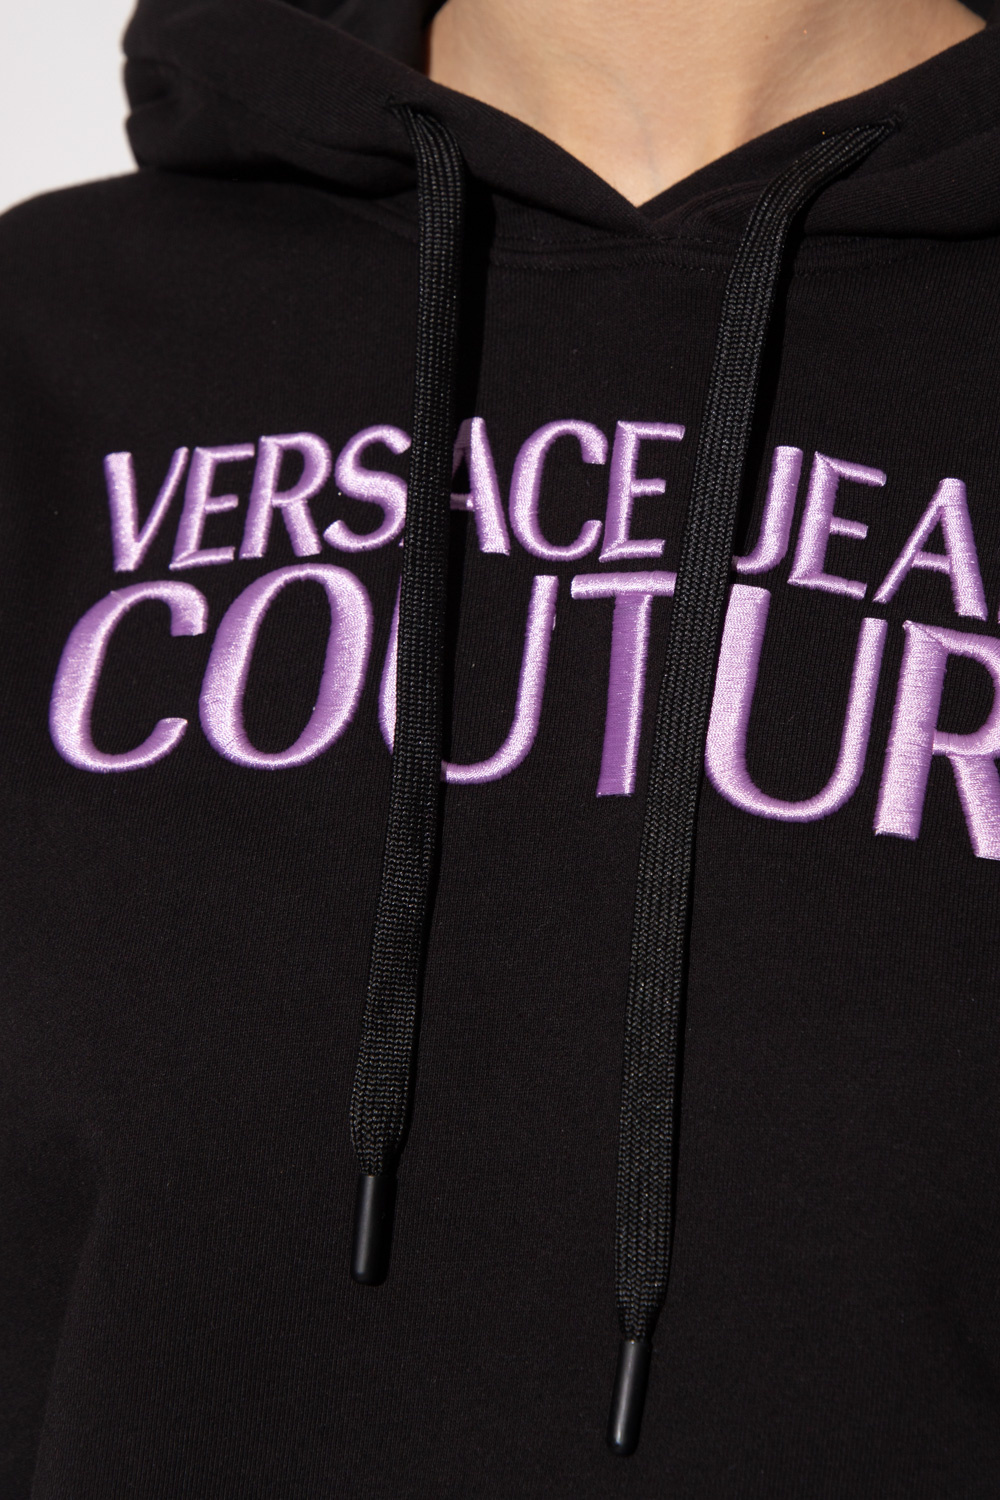 Versace Jeans Couture Frost Polo Shirt